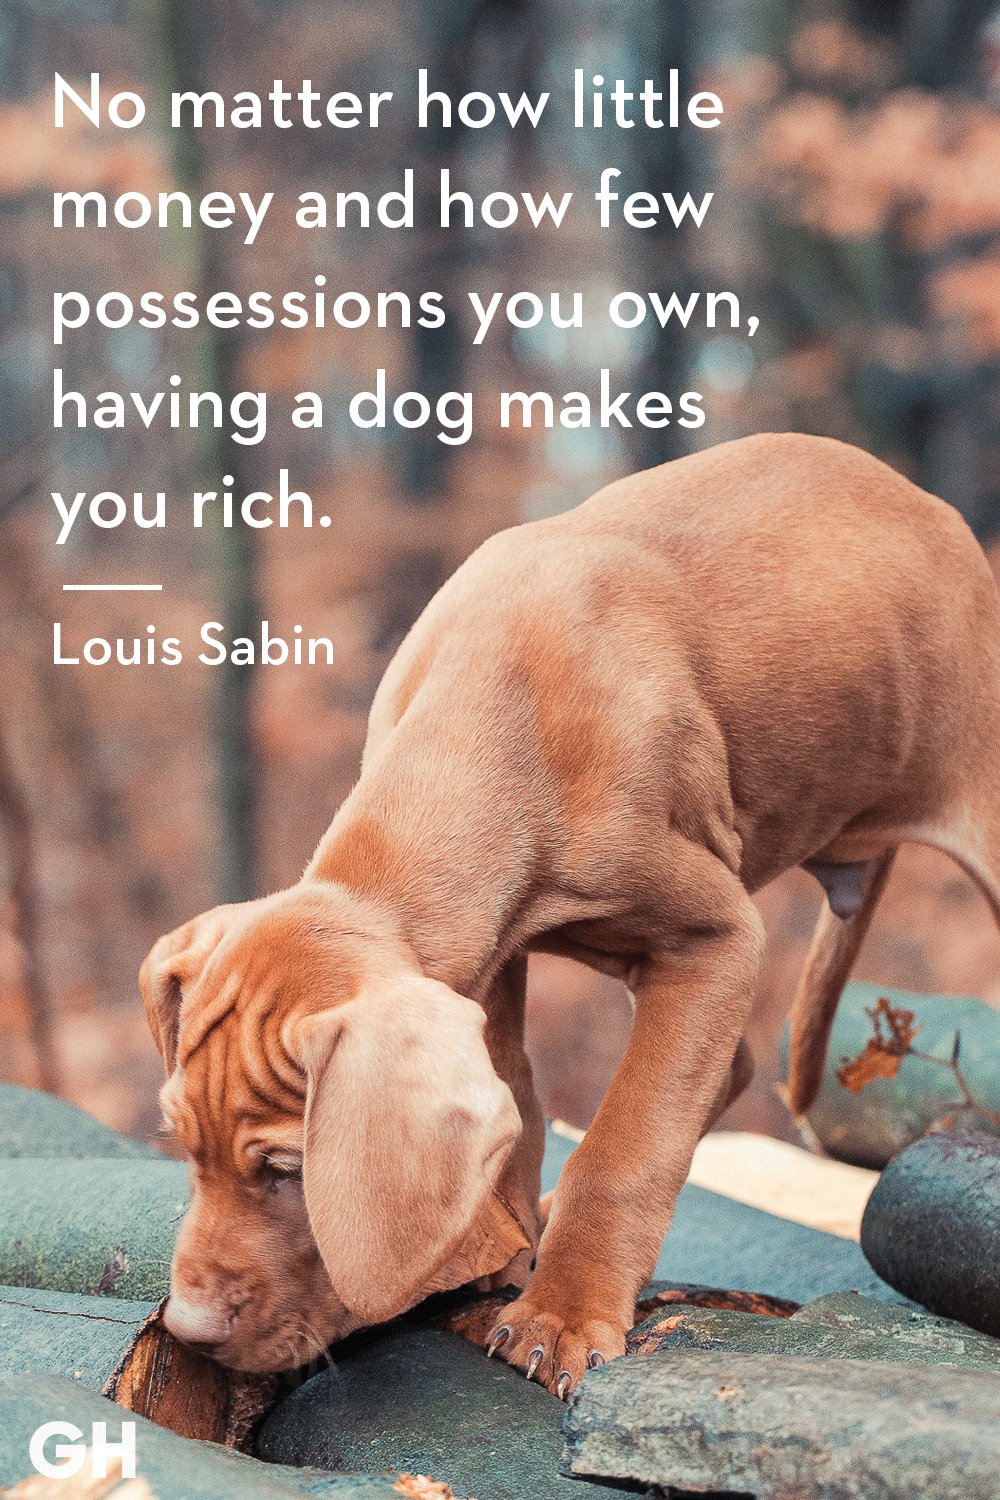 30 Dog Quotes That Every Animal Lover Will Relate To Best - 